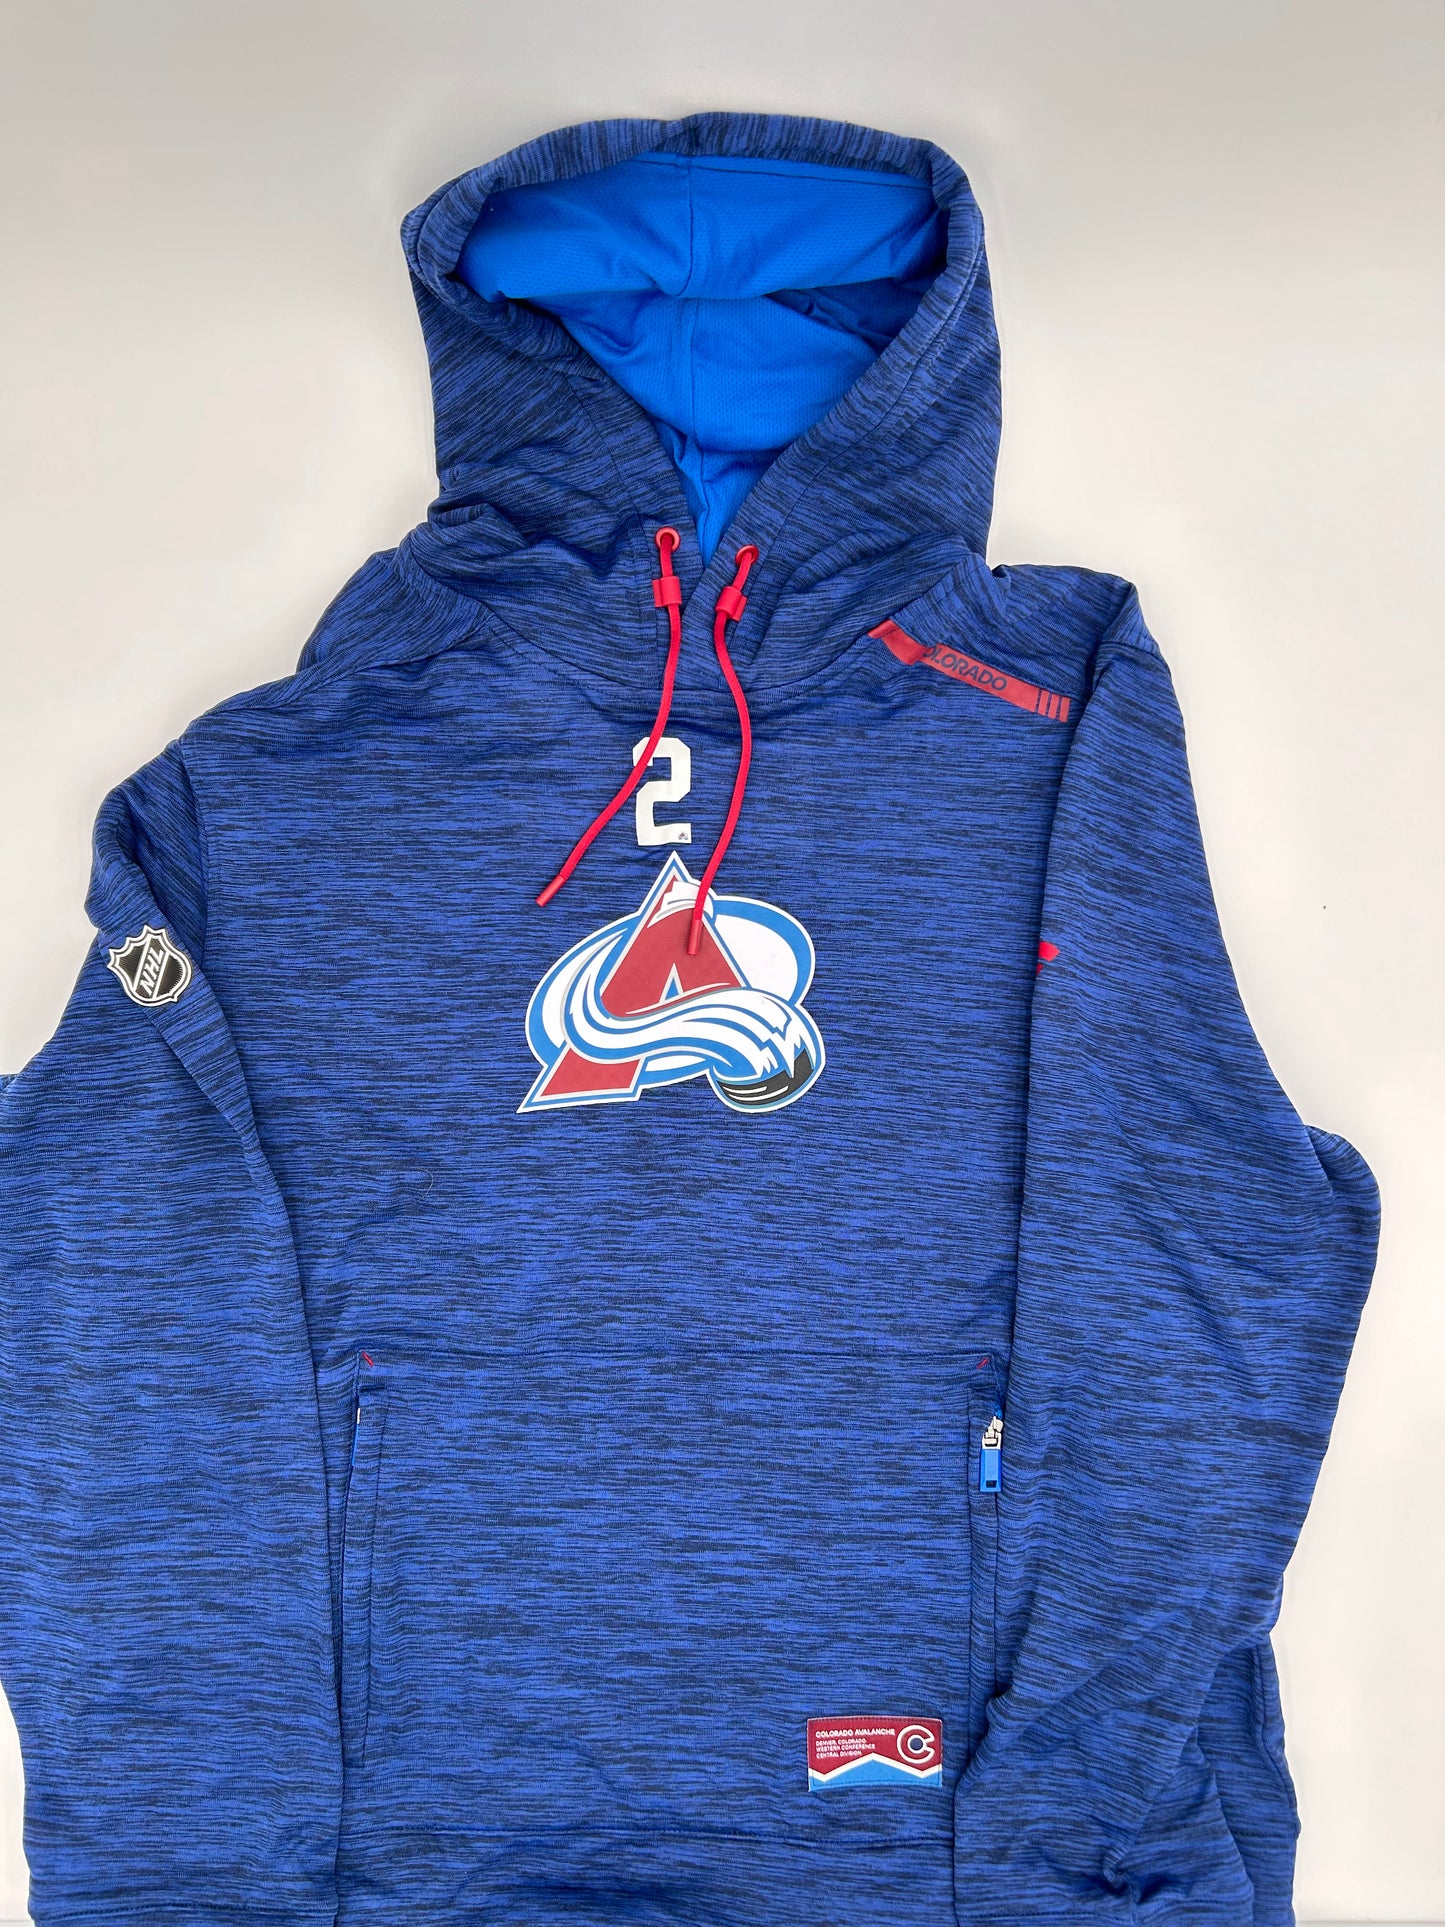 Colorado Avalanche Player Worn Blue Sweatshirt (With Patch)